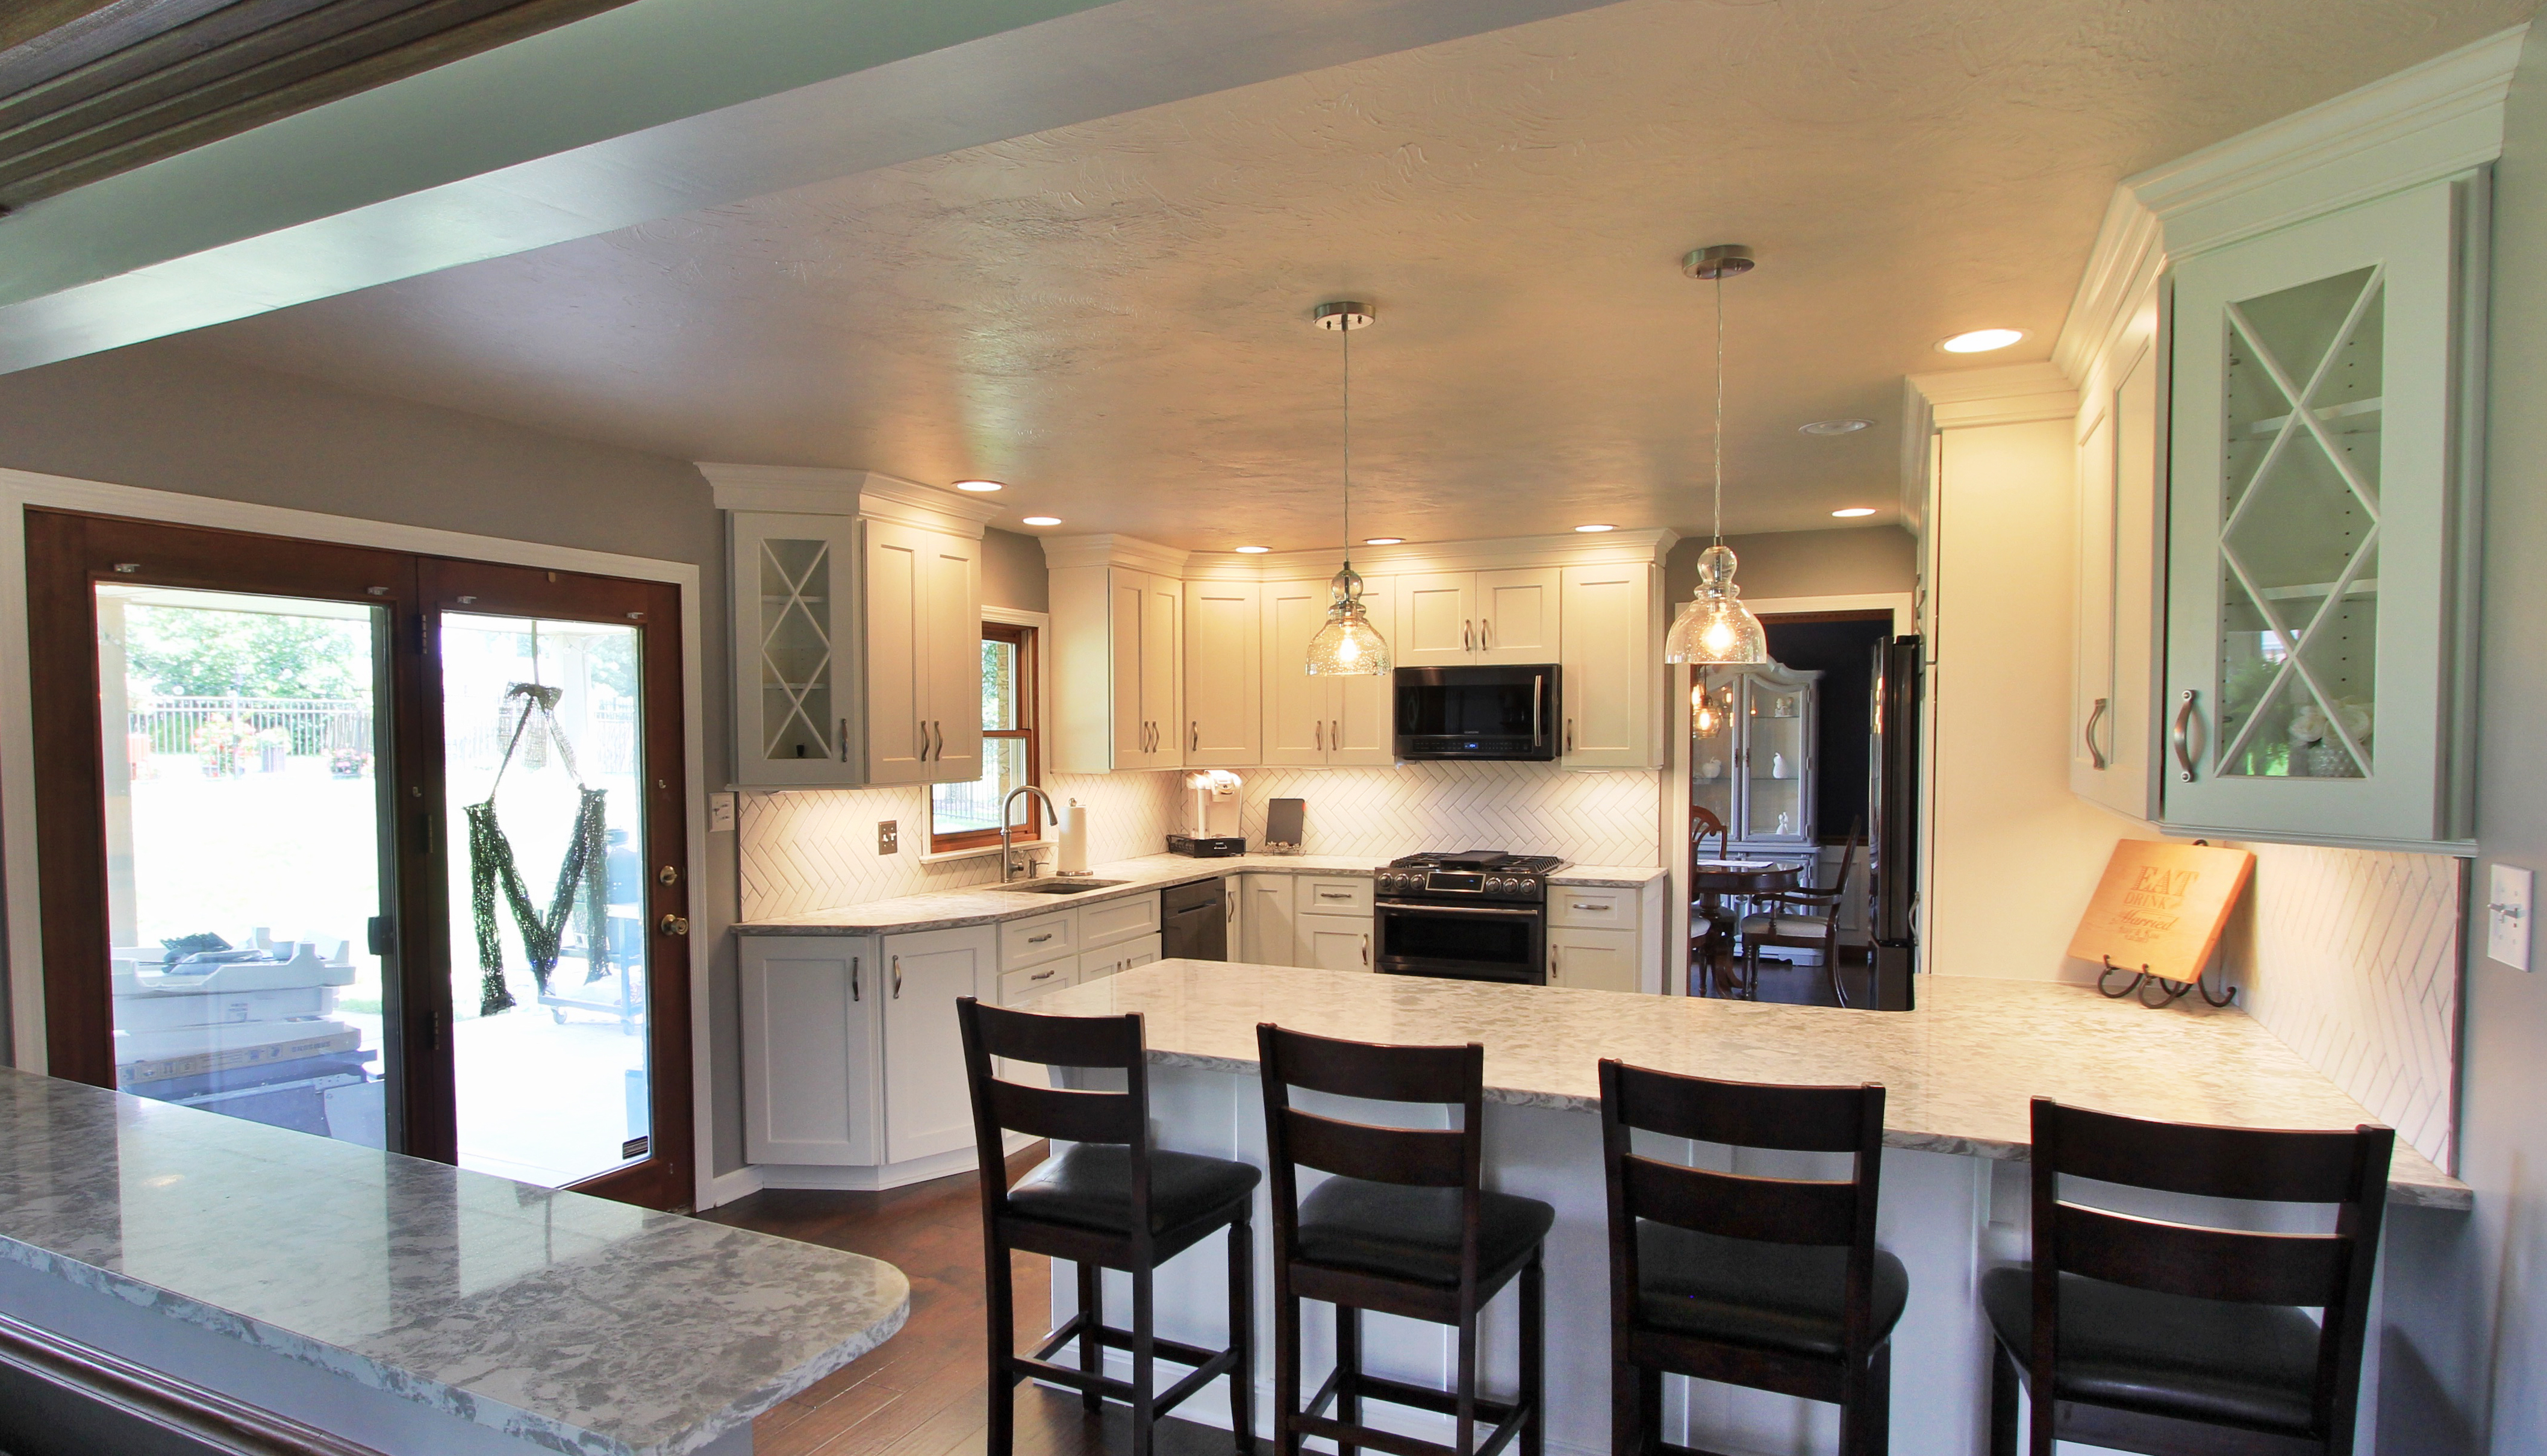 Remodeled Kitchen by Kingswood Designs